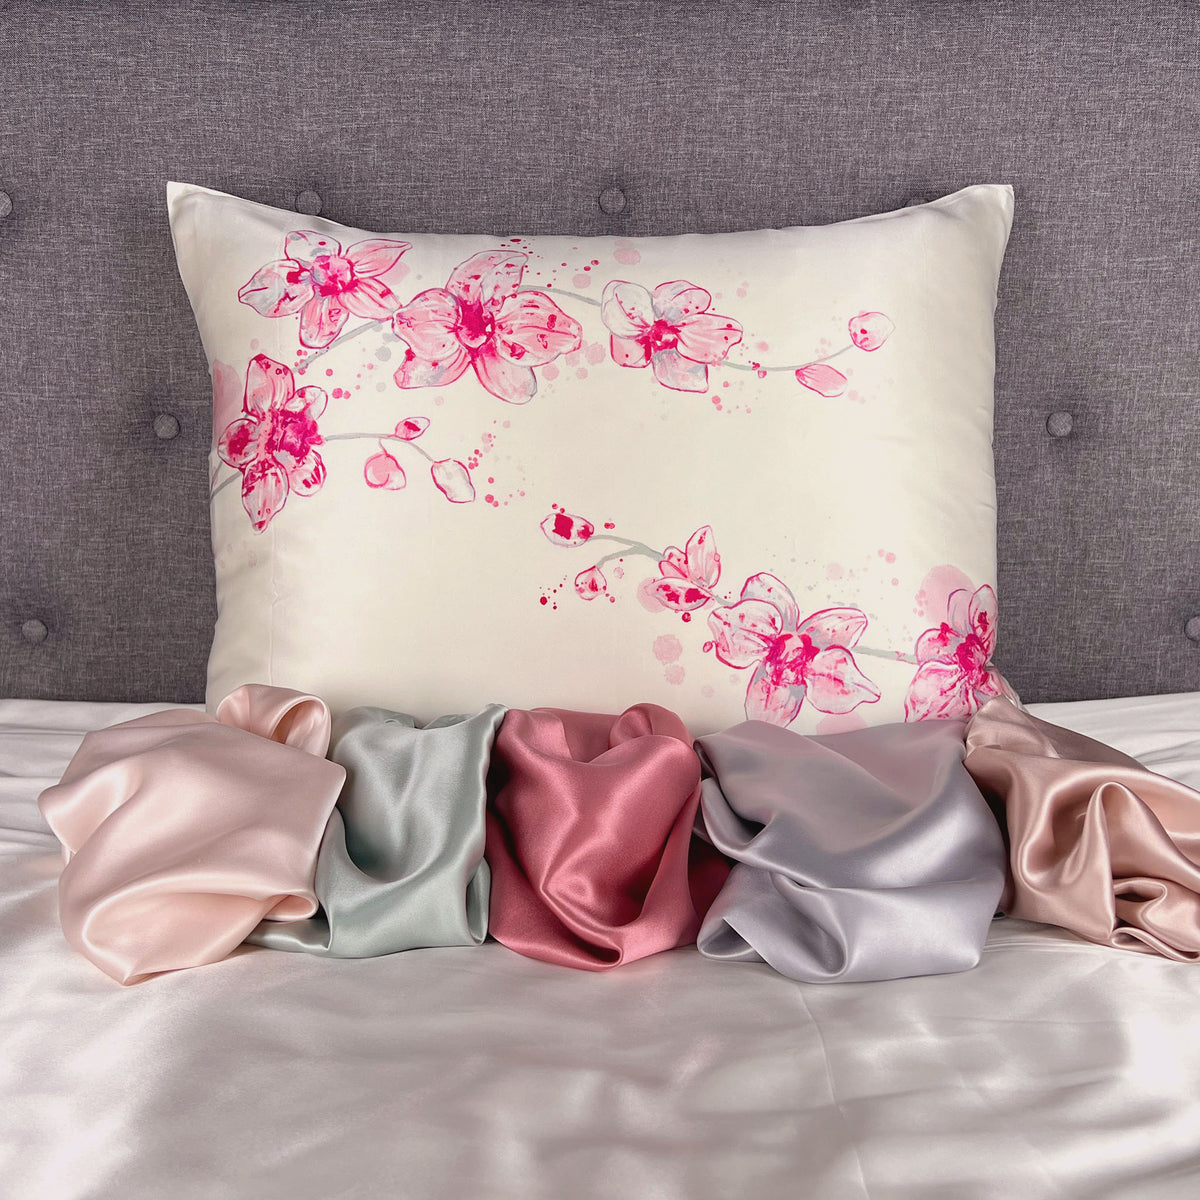 Gallery Collection Silk Pillowcase - Pink Orchids